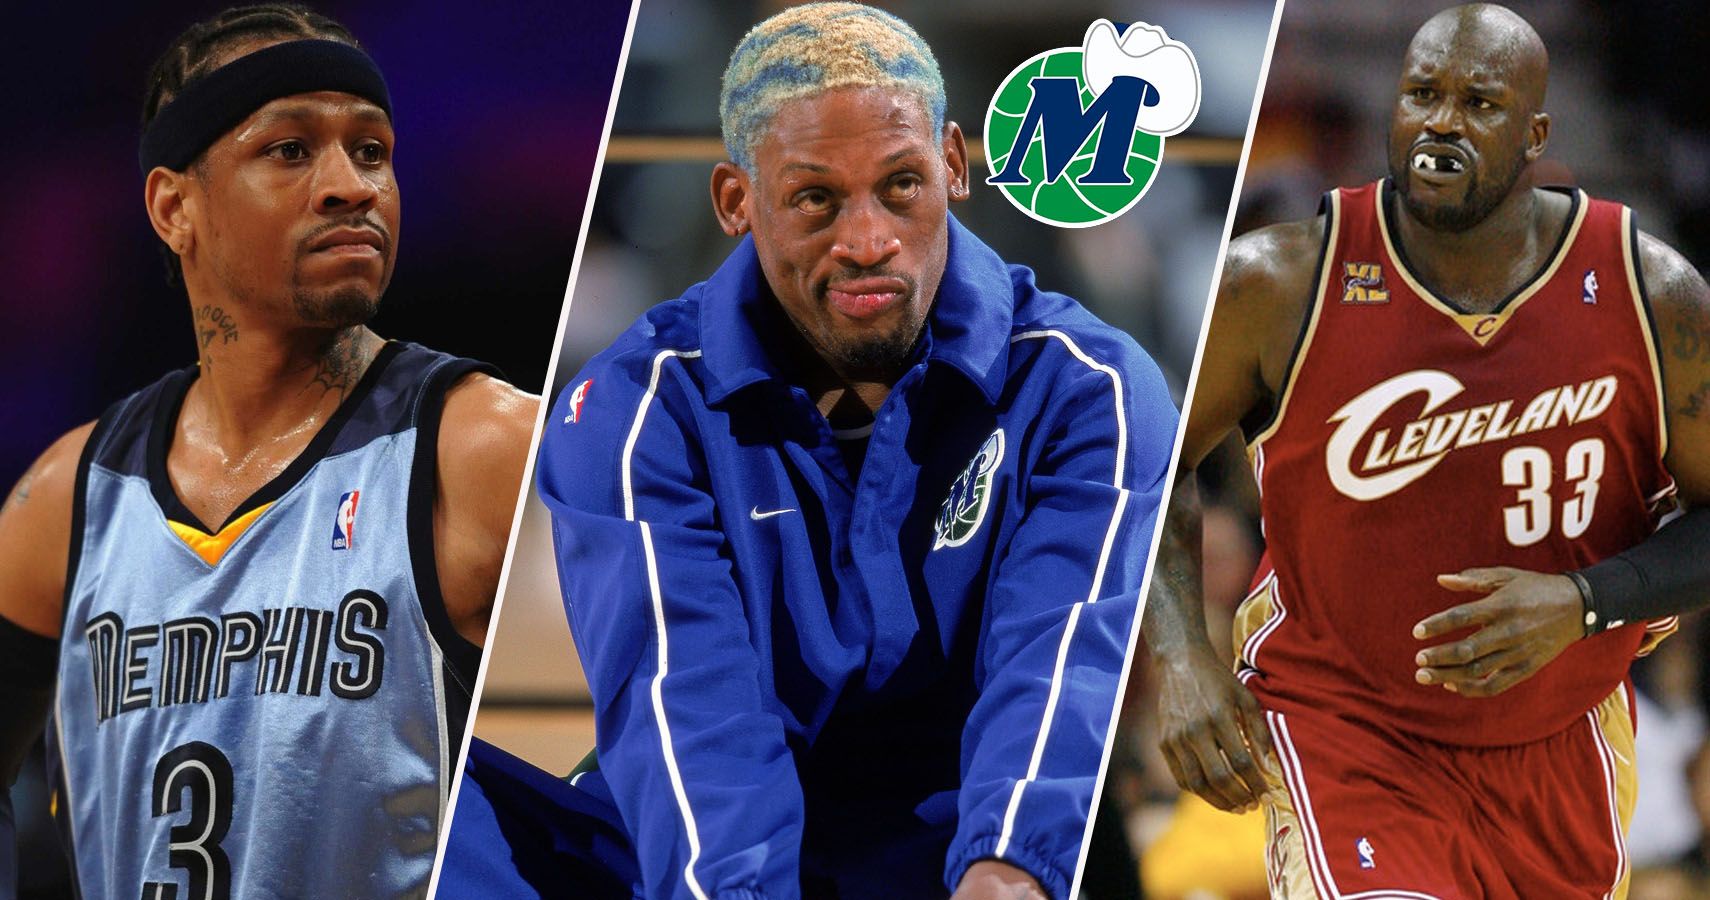 20-nba-stars-who-had-very-forgettable-stints-with-random-teams